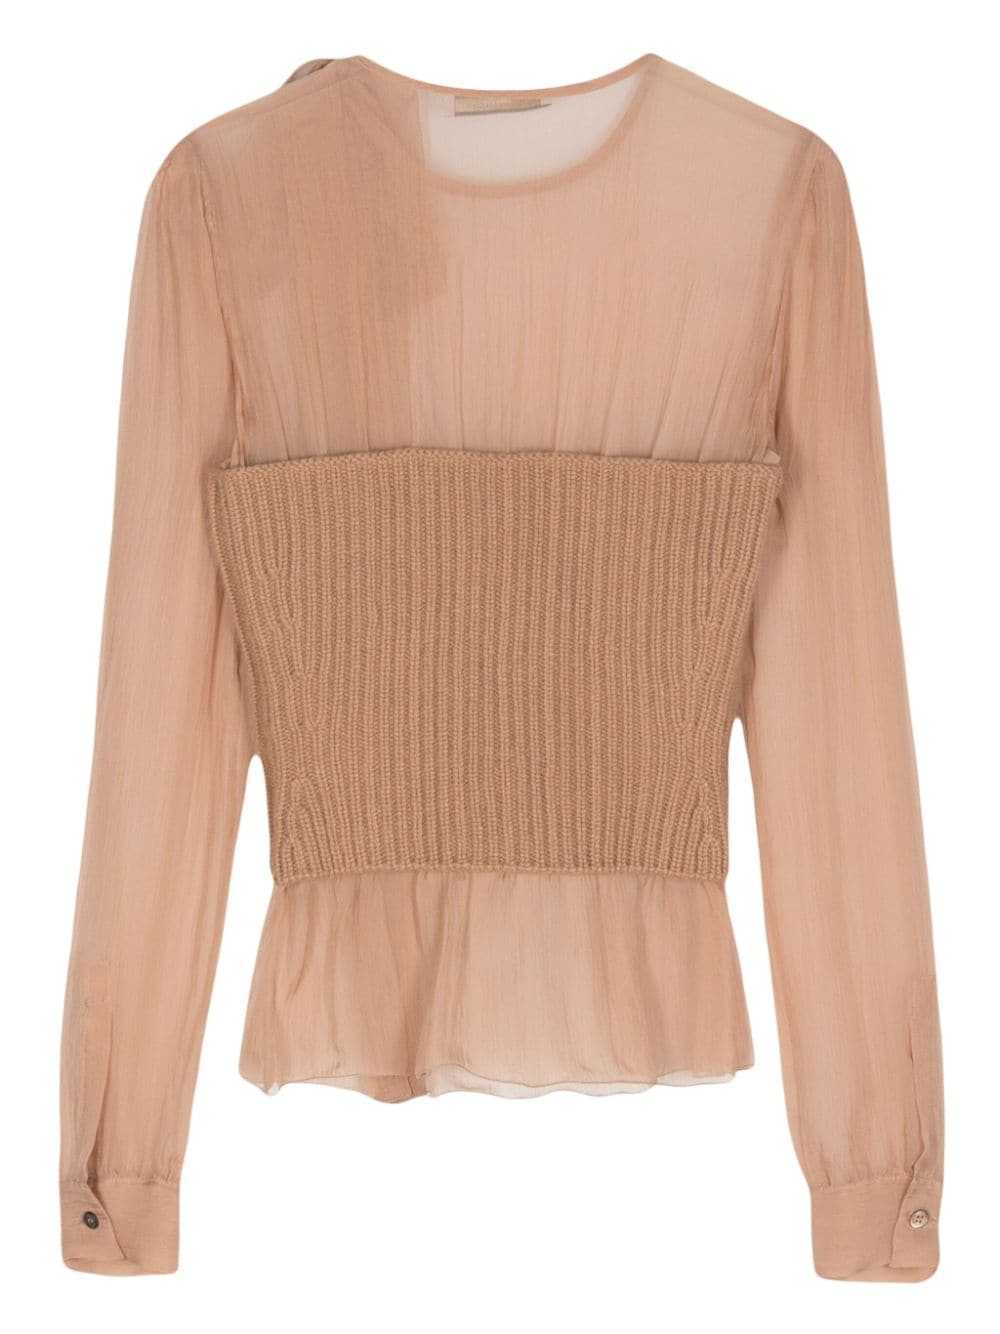 Prada Pre-Owned 2010s panelled blouse - Neutrals - image 2